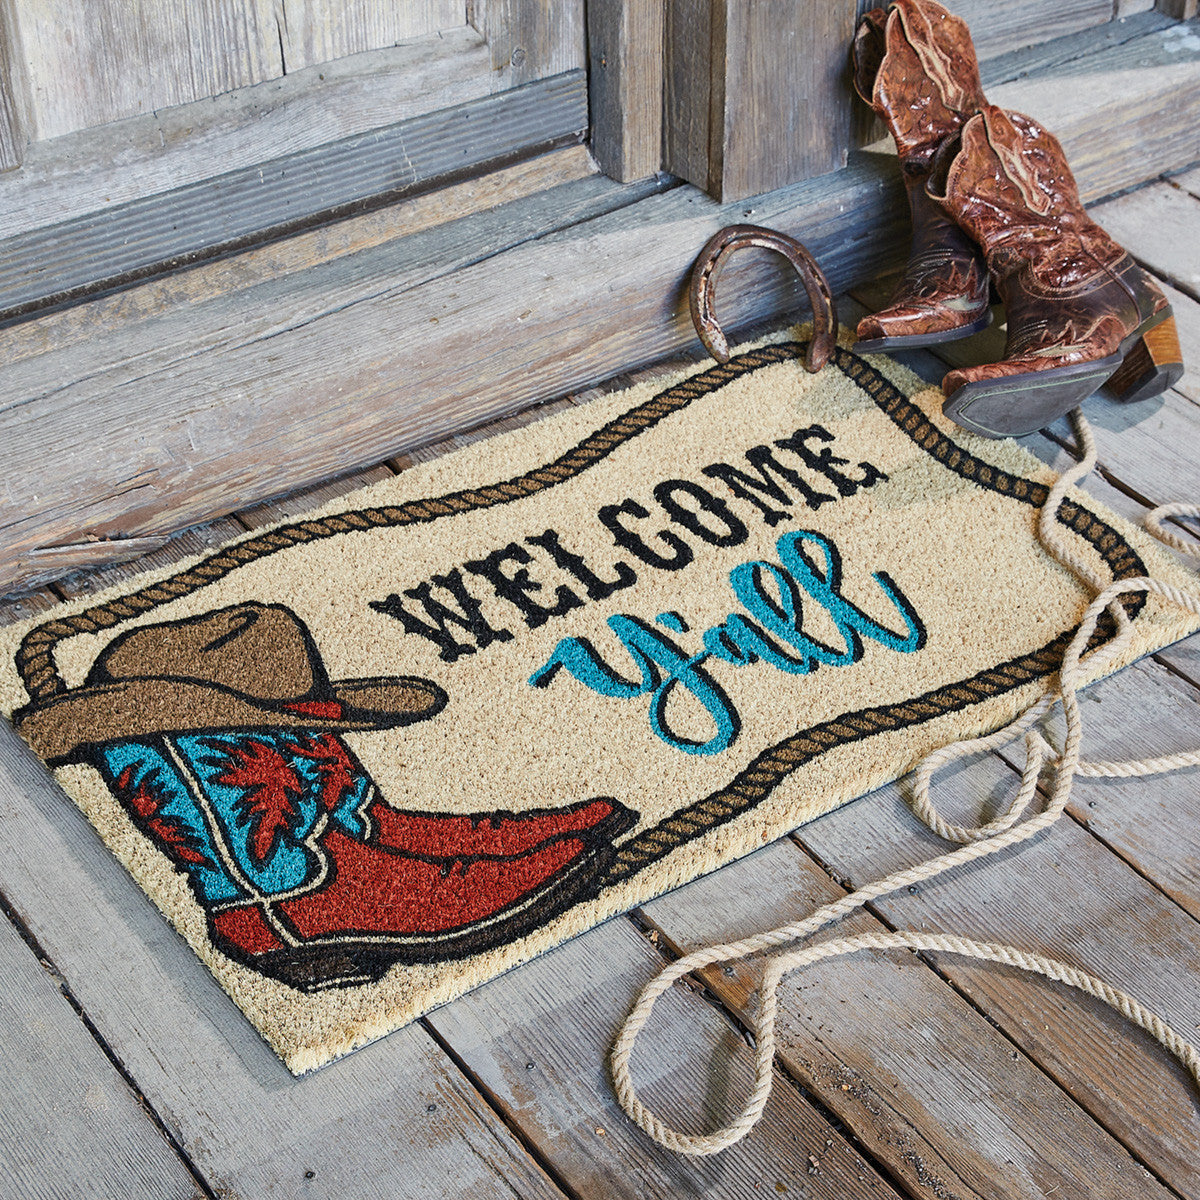 Coheed and cambria, doormat, welcome mat, farmhouse, music, welcome home,  housewarming, birthday, gift, Father’s Day, rock, metal